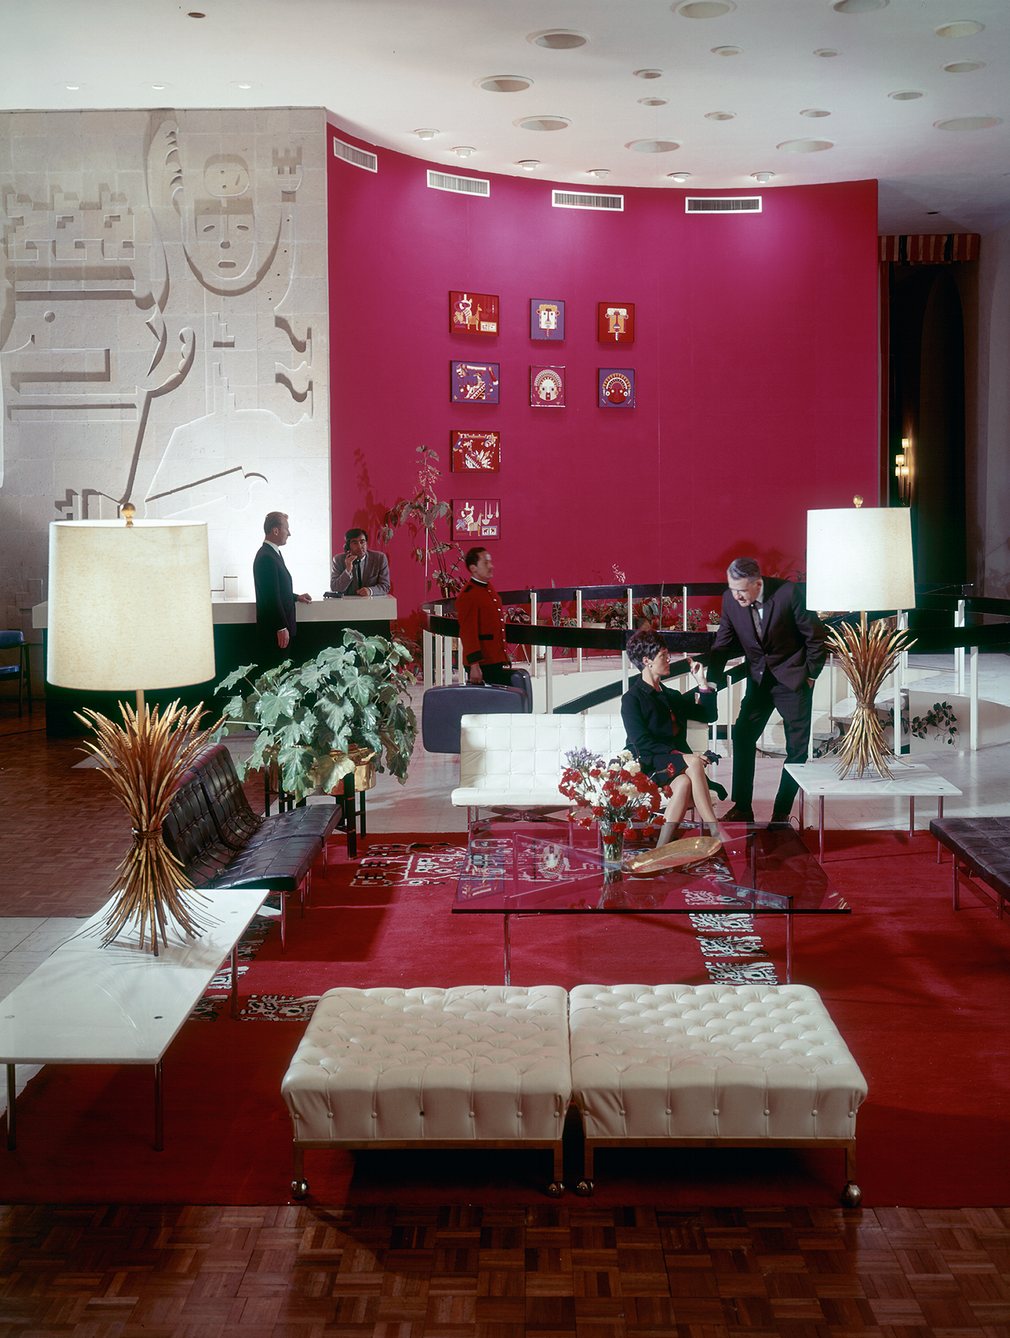 Neal Prince InterContinental Hotel Quito 1967